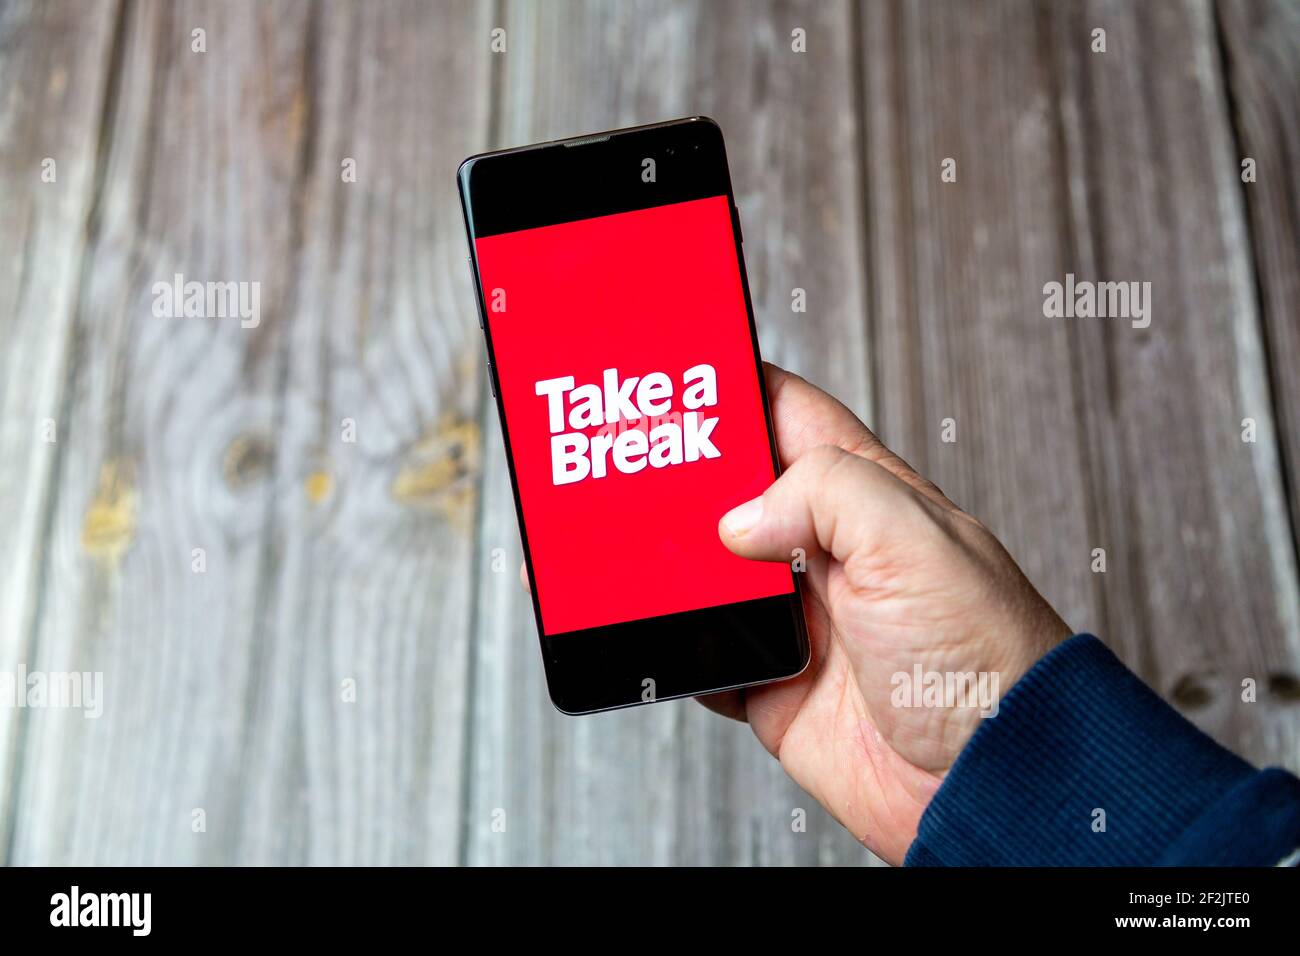 A Mobile phone or cell phone being held in a hand with the Take a Break app open on screen Stock Photo